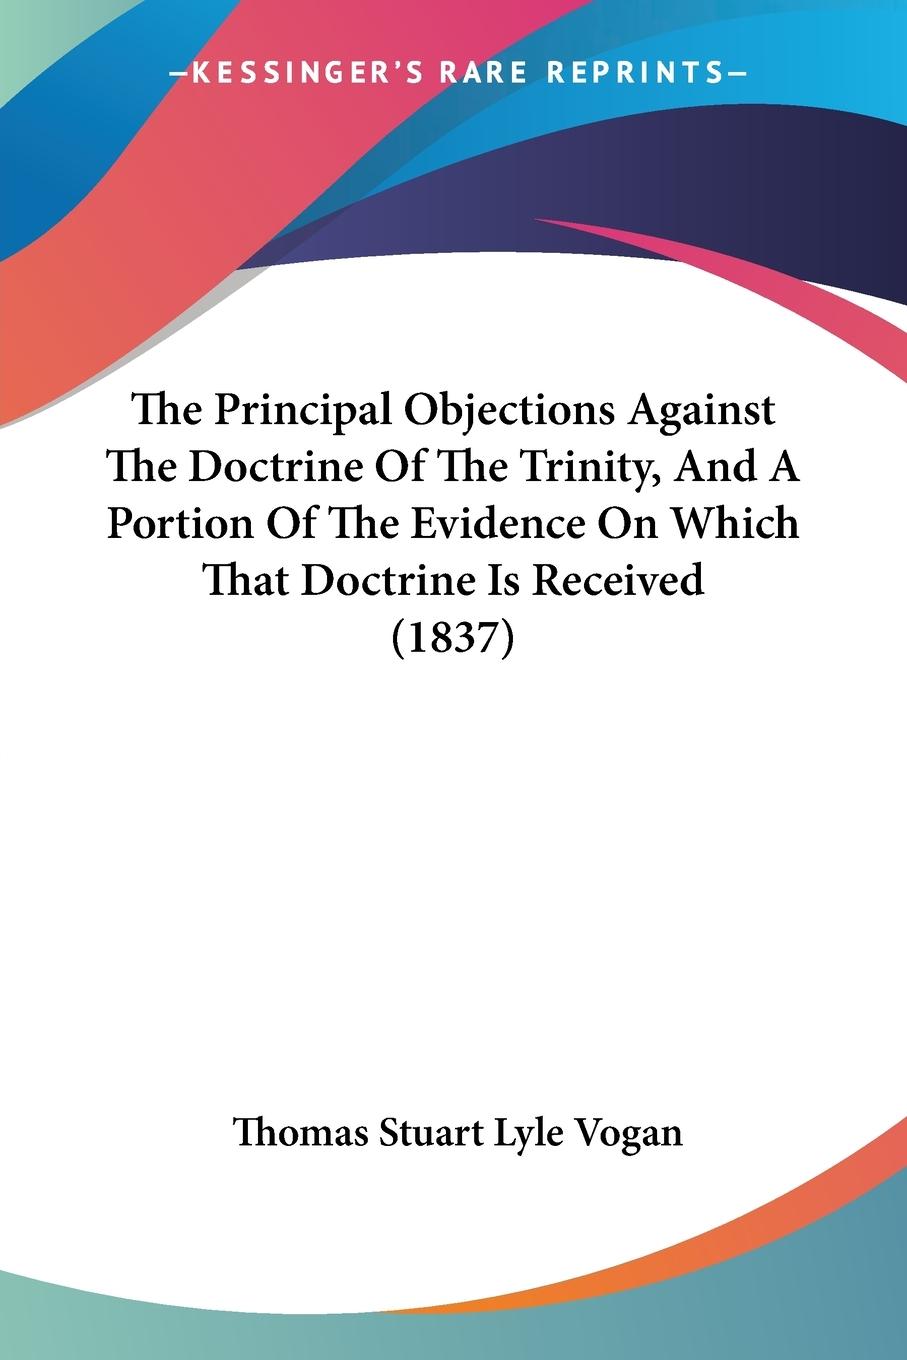 The Principal Objections Against The Doctrine Of The Trinity, And A Portion Of The Evidence On Which That Doctrine Is Received (1837) - Vogan, Thomas Stuart Lyle